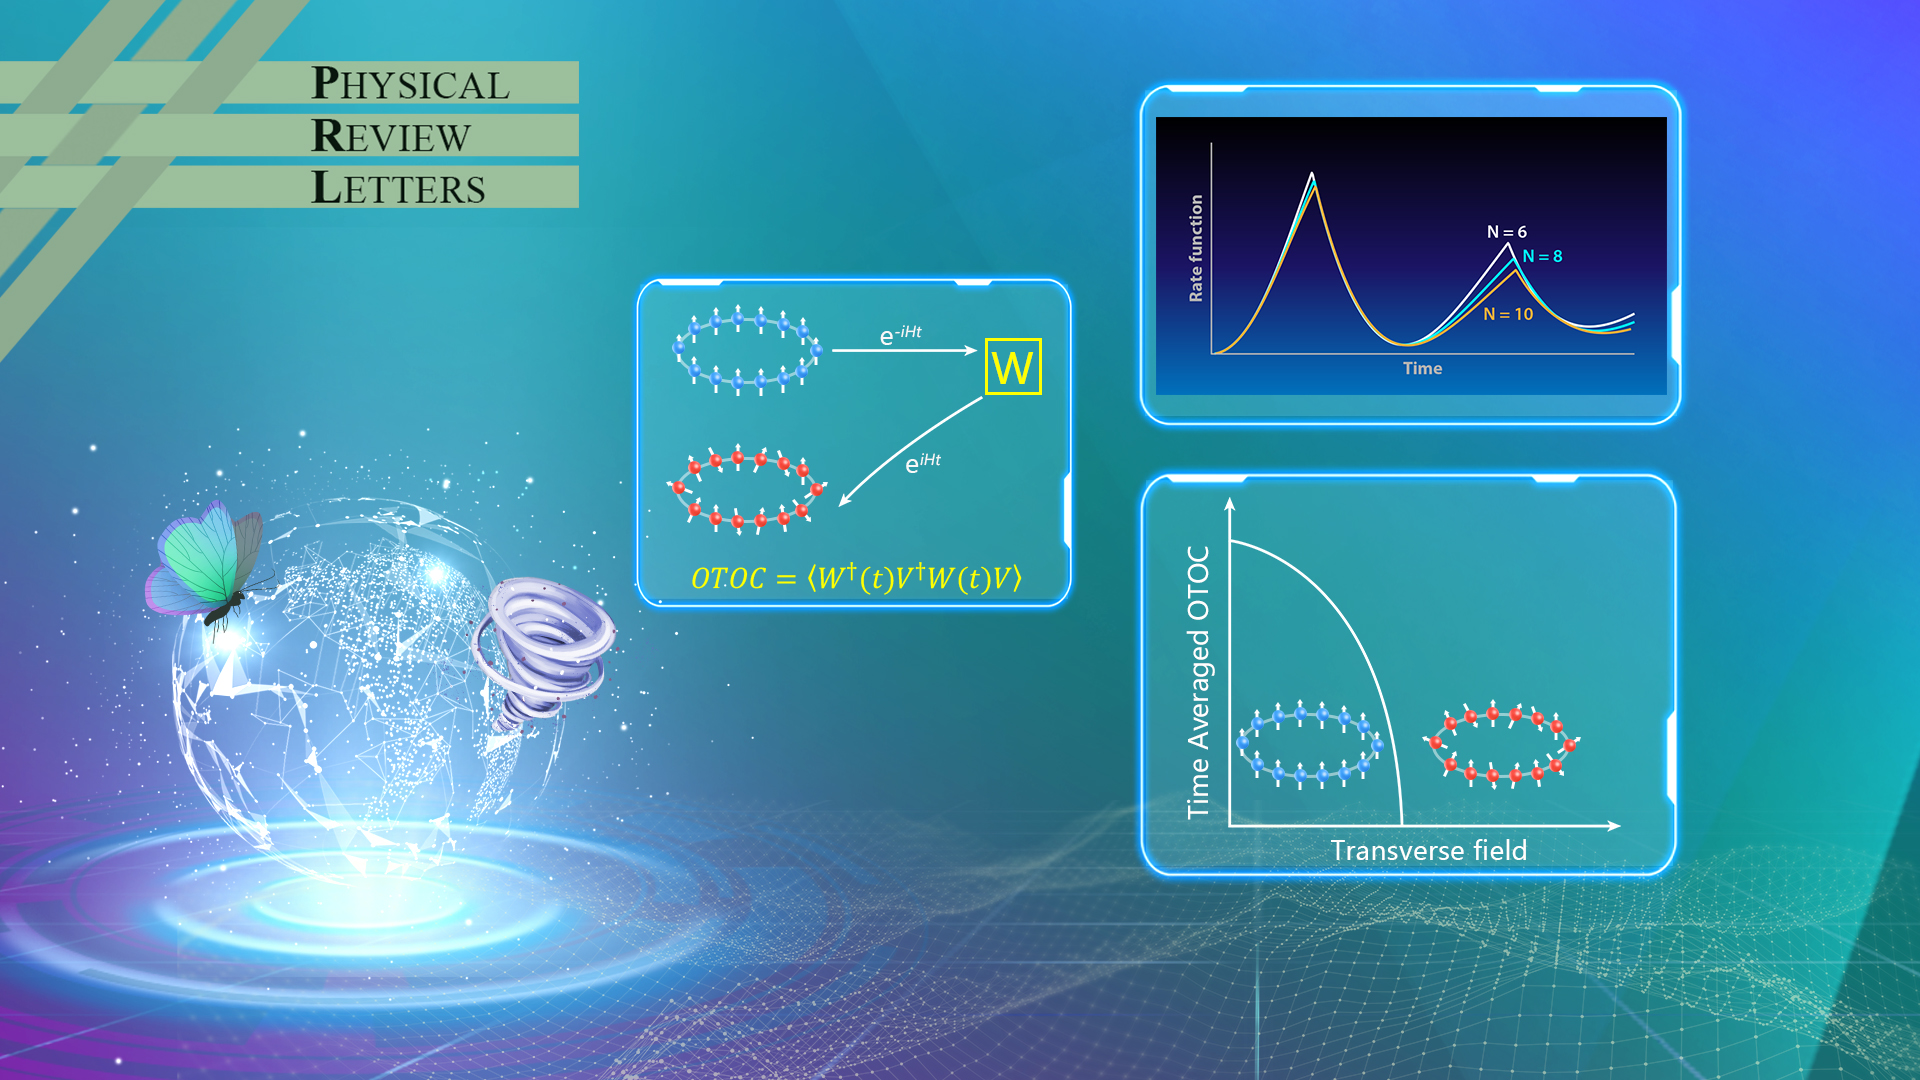 SUSTech-based researchers make progress in quantum phase transitions